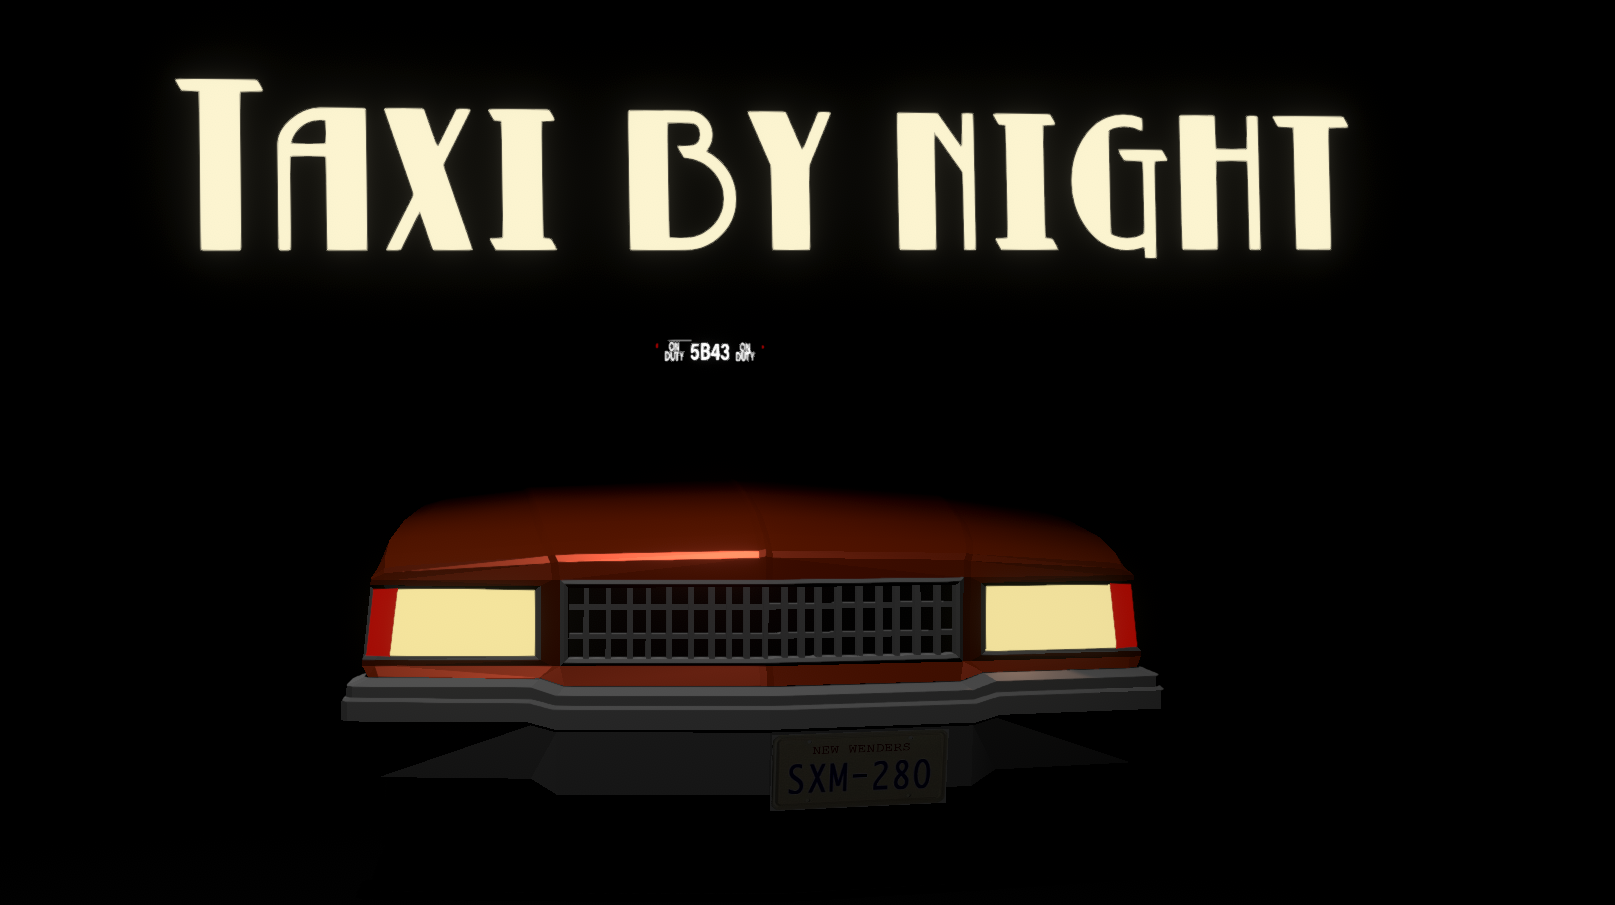 Taxi By Night